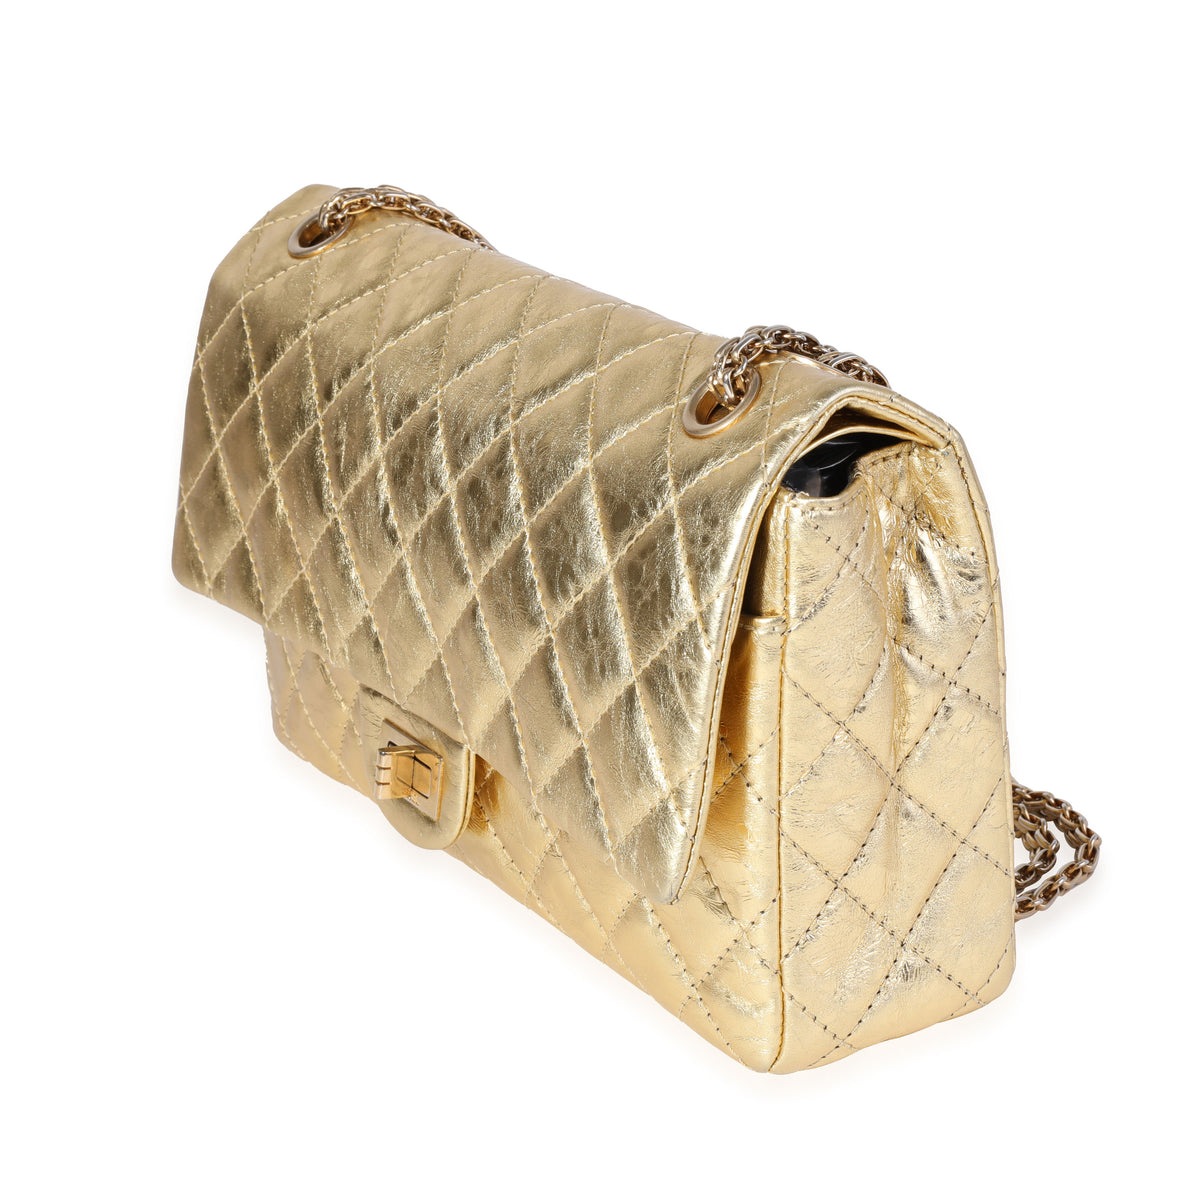 Chanel Metallic Gold Quilted Calfskin Reissue 2.55 226 Double Flap Bag